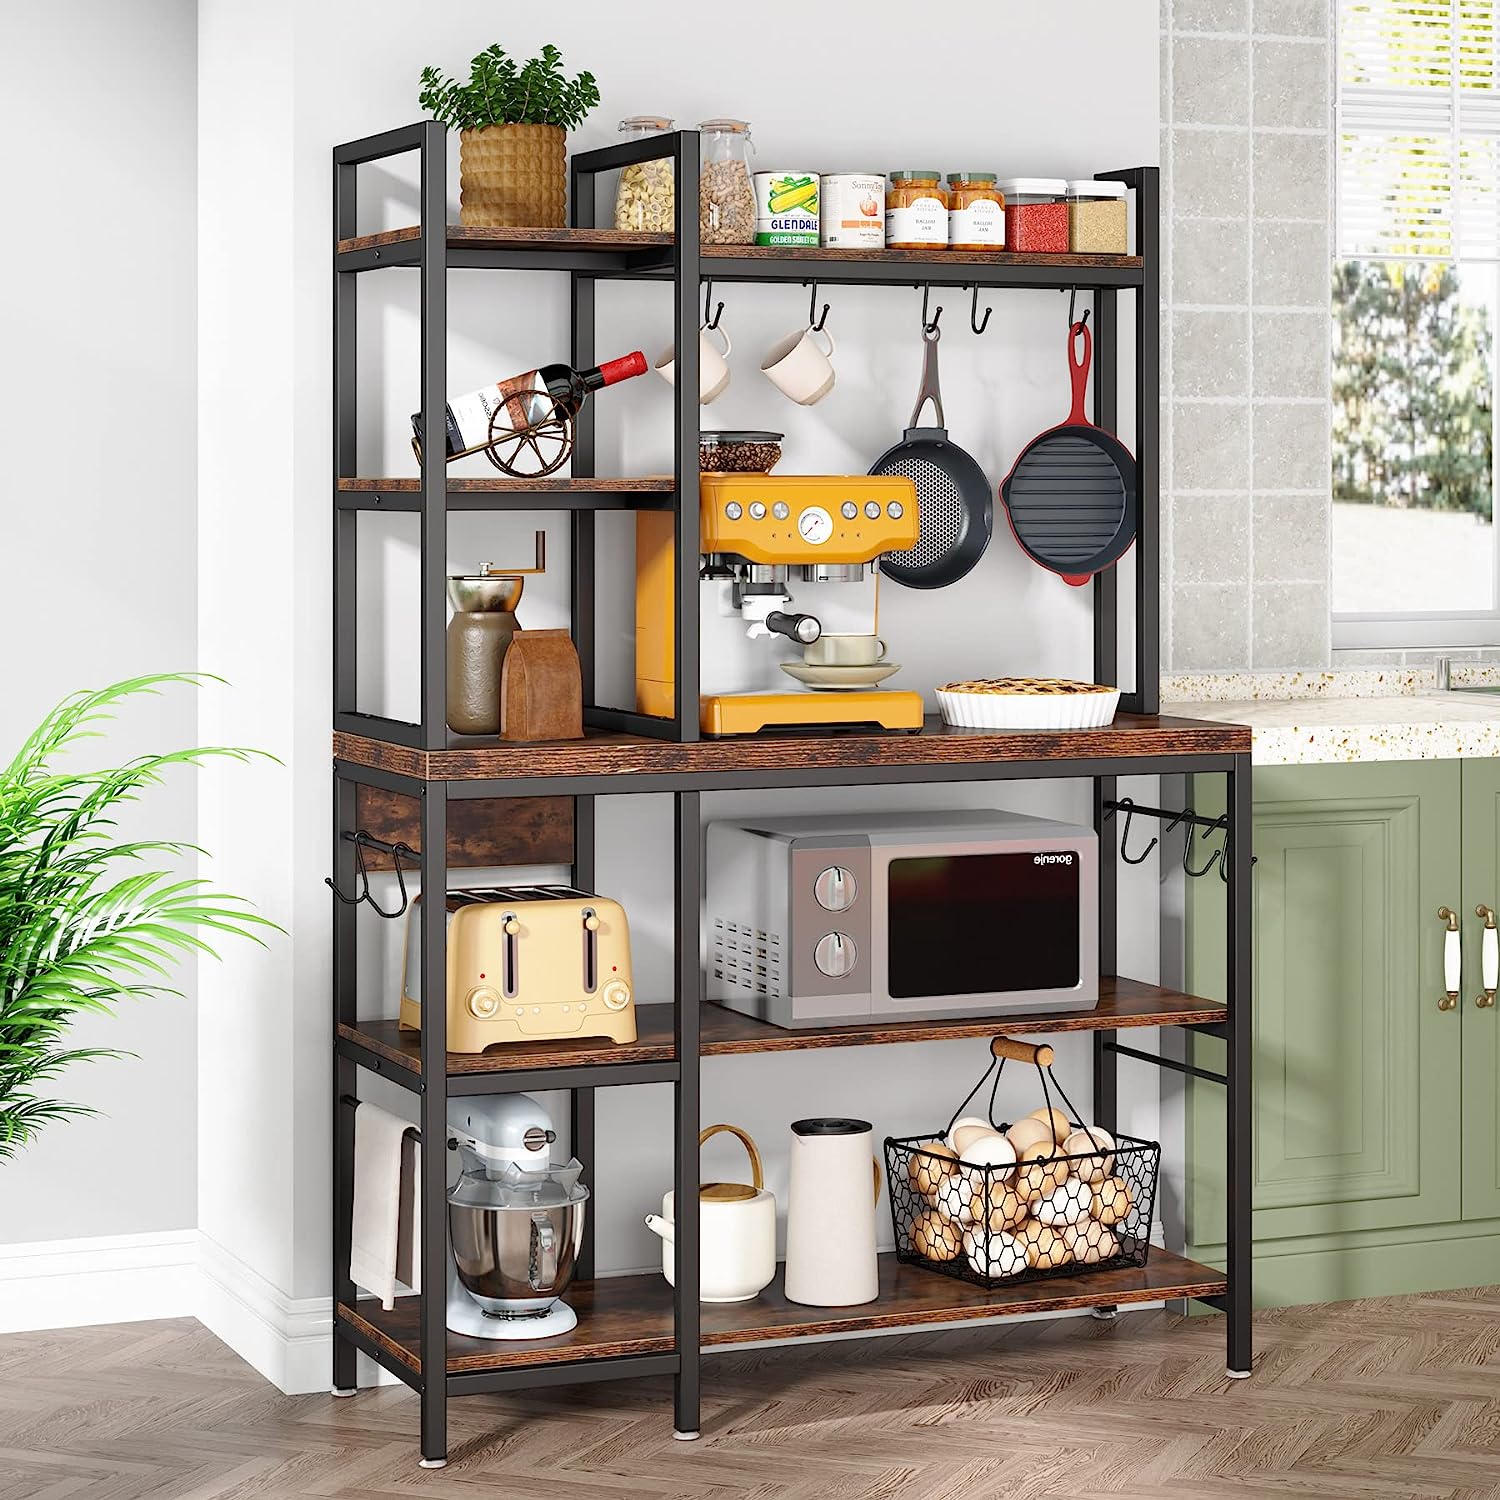 20 Best Under Cabinet Shelving In 2023: Reviews & Buying Guide –  kitch-science